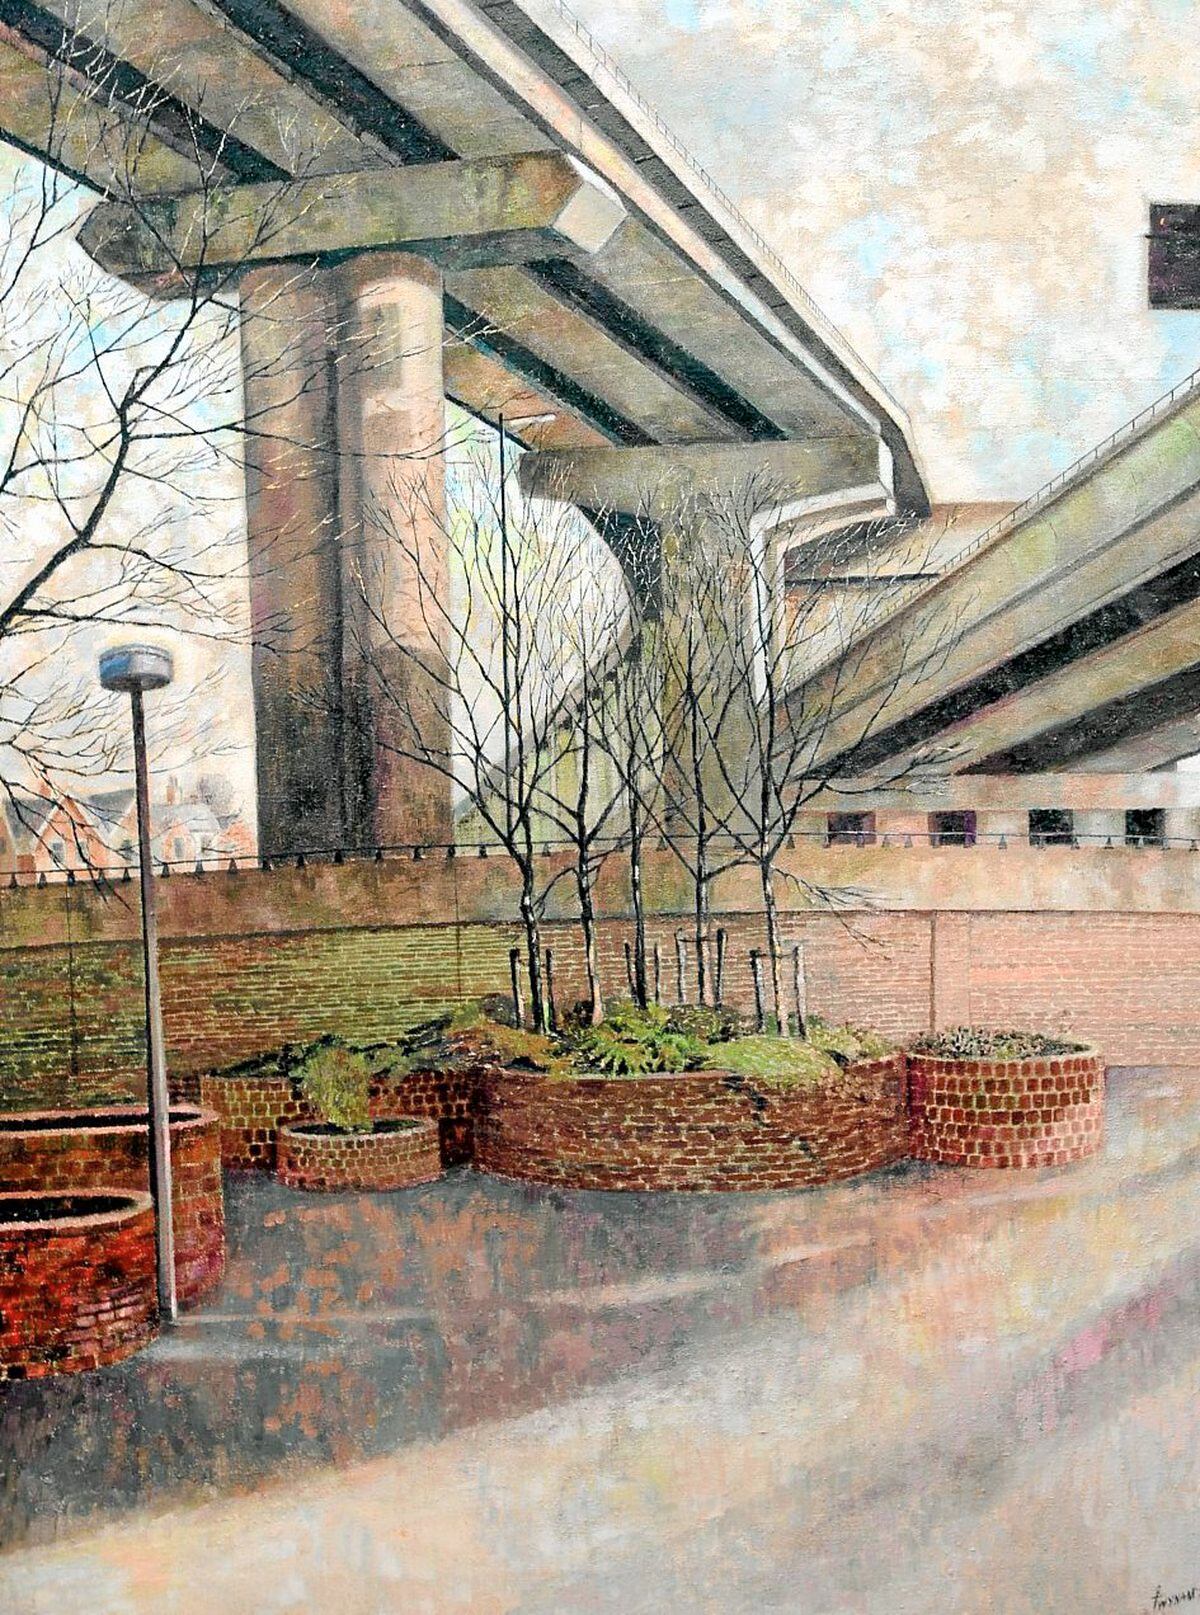 Artist Roland Twyman's painting of a view underneath the Spaghetti Junction